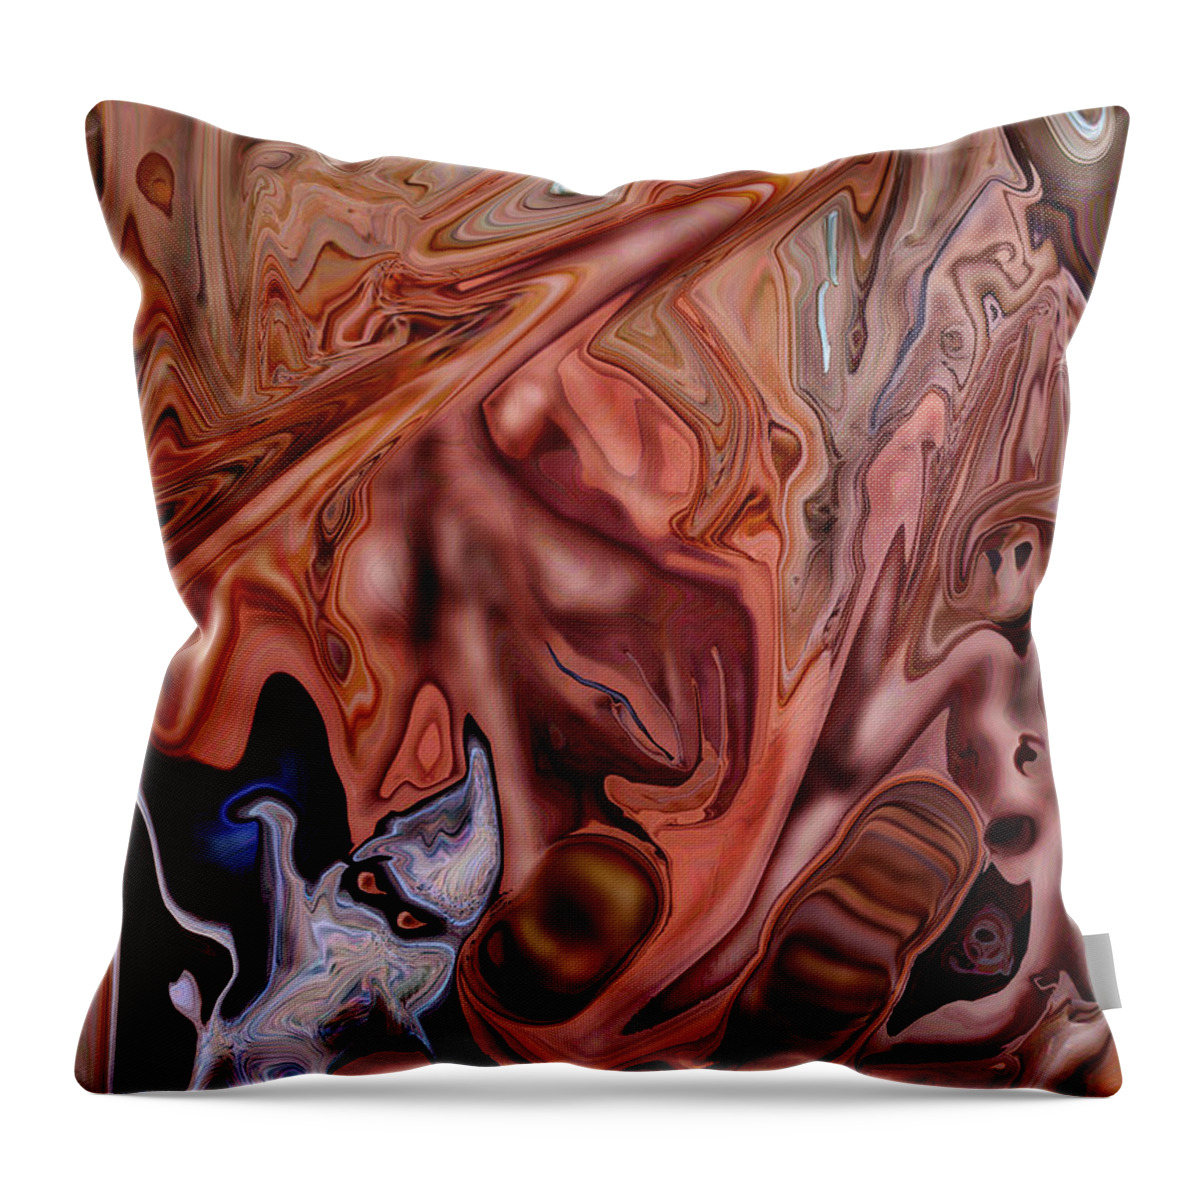 Digital Painting Throw Pillow featuring the digital art Courthouse Architects by Paul Anderson